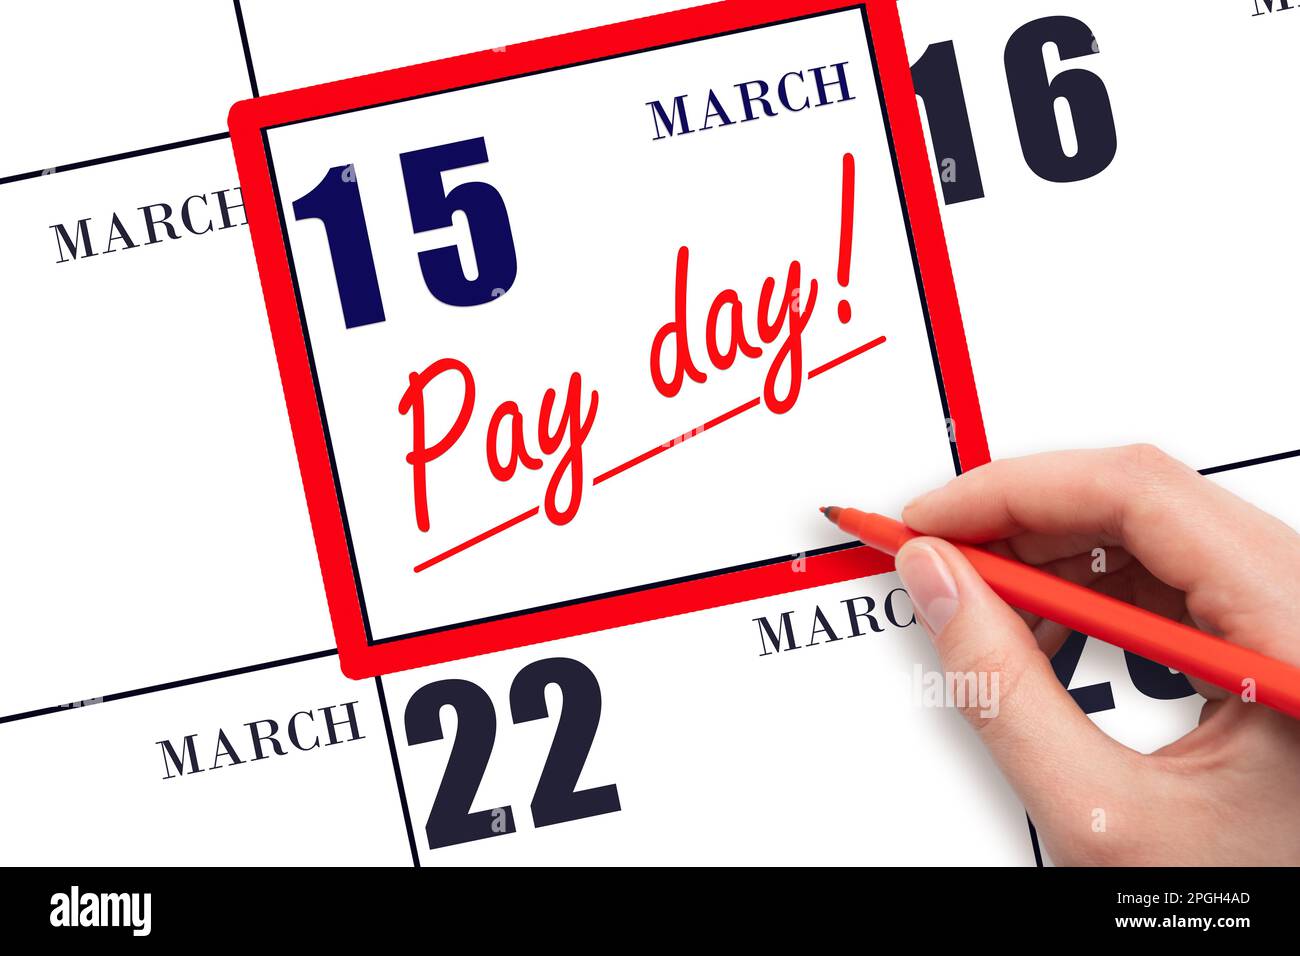 15th day of March. Hand writing text PAY DATE on calendar date March 15 and underline it. Payment due date. Reminder concept of payment. Spring month, Stock Photo